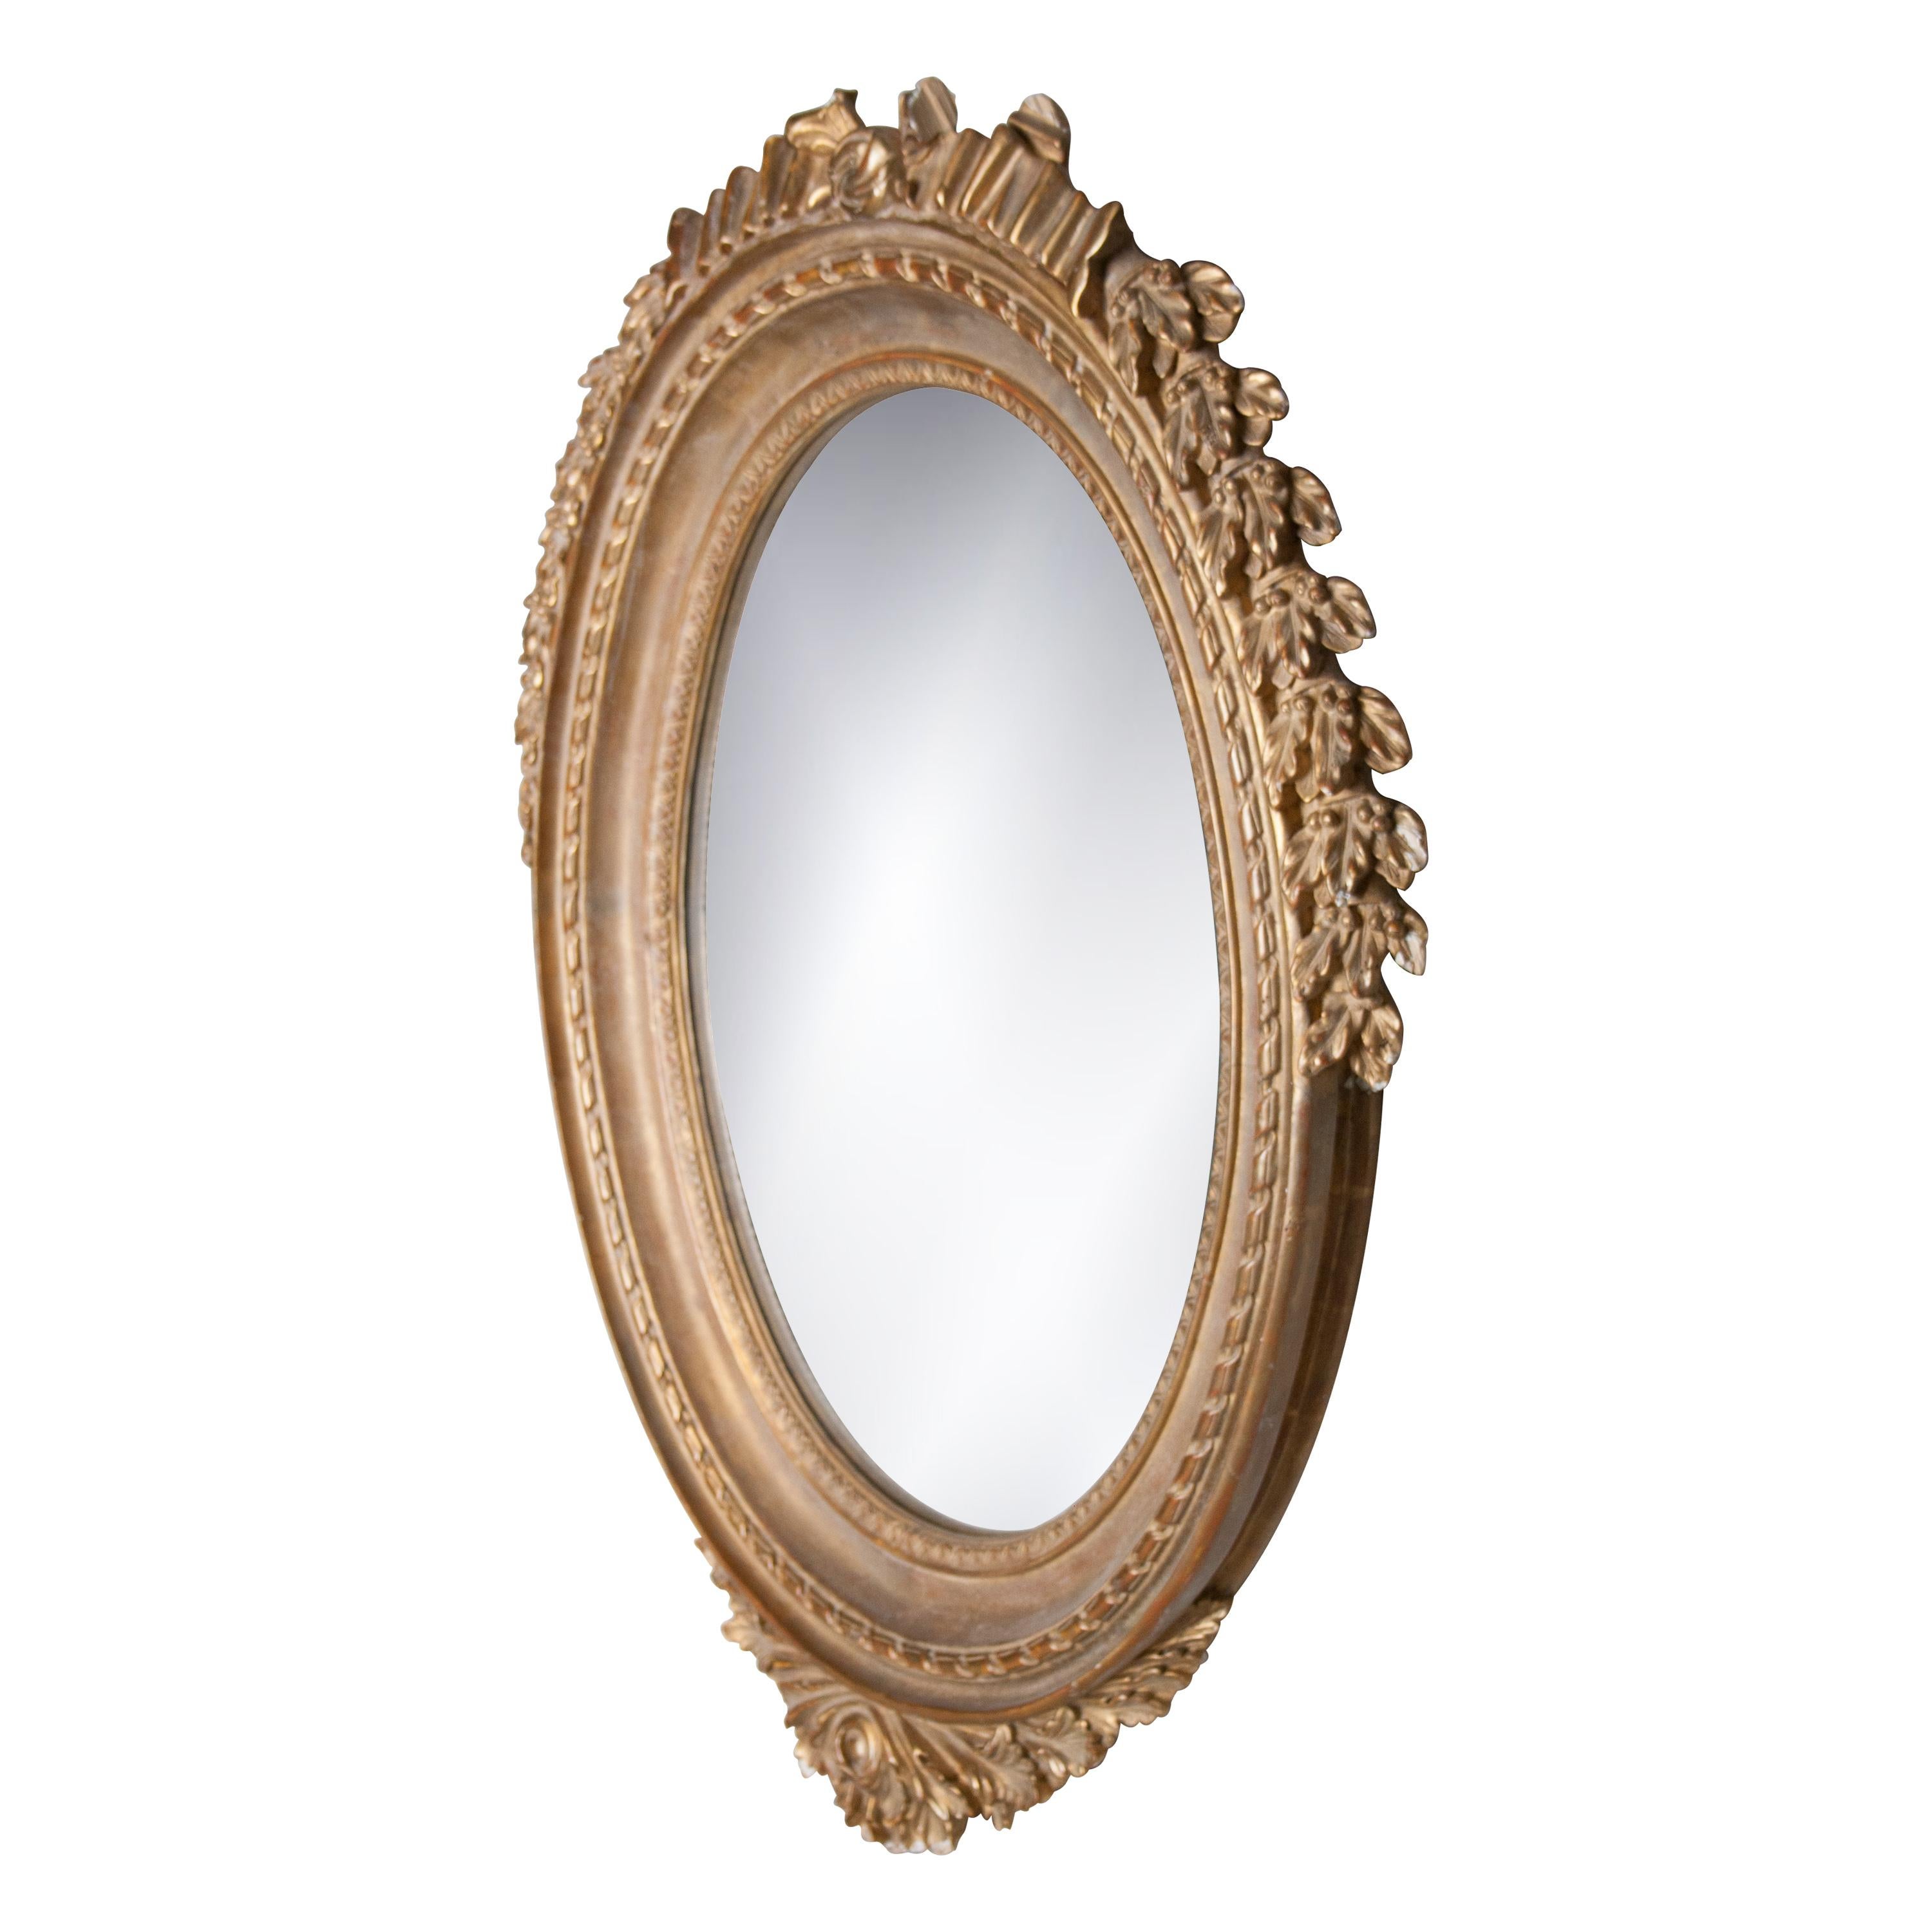 Neoclassical Regency style handcrafted mirror. Round, acanthus leaf, hand carved wooden structure with gold foil finished. Spain, 1970.